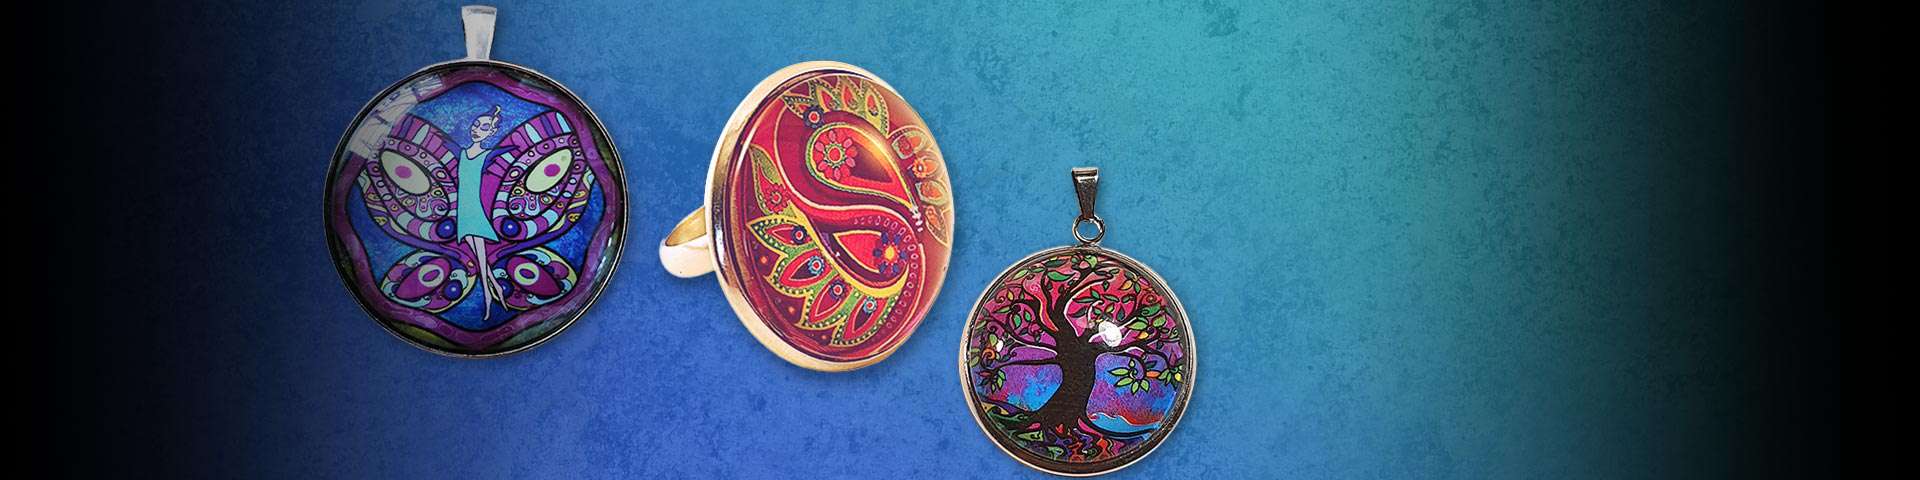 Background image art jewellery handcrafted with original designs, pendants rings and earrings